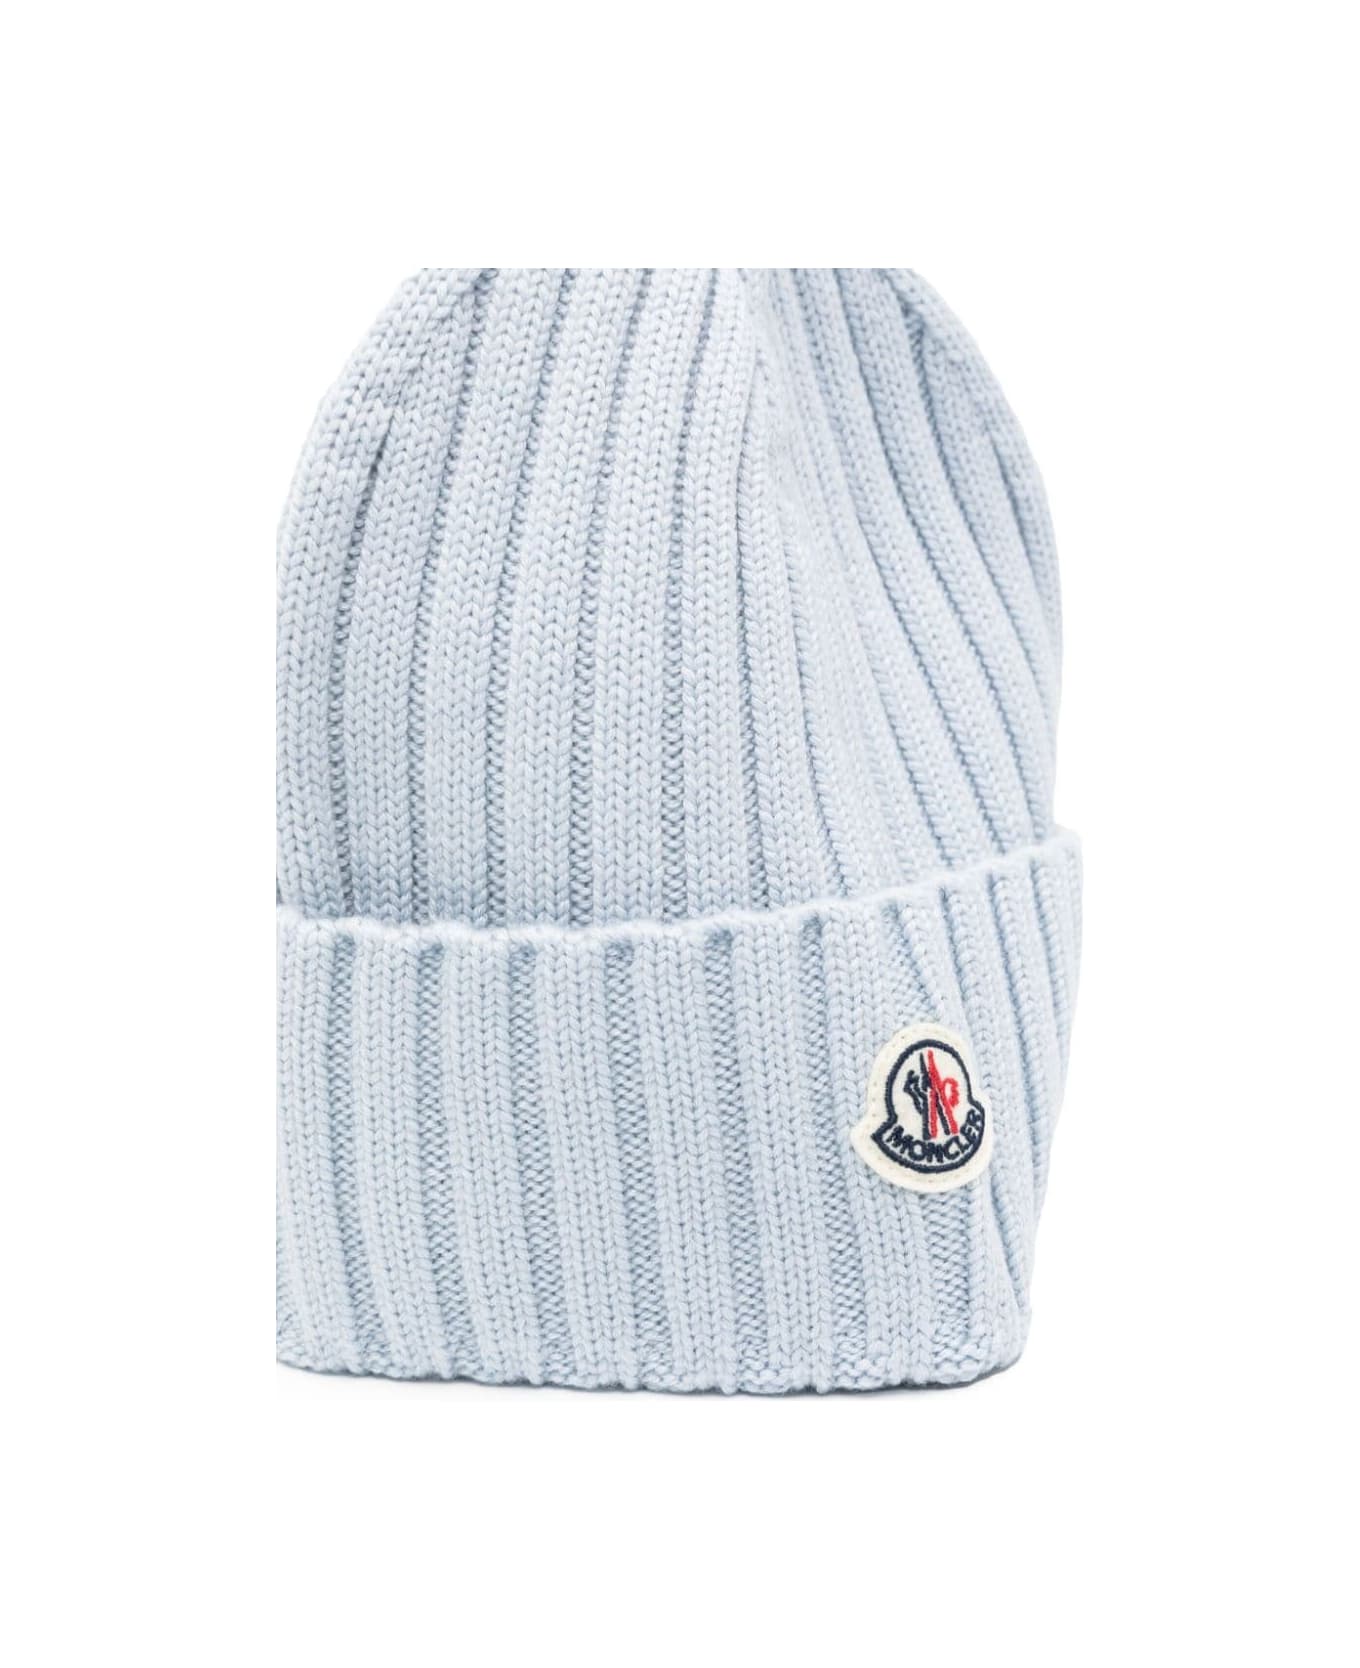 Moncler Bright Blue Ribbed Wool Beanie With Logo - Blue